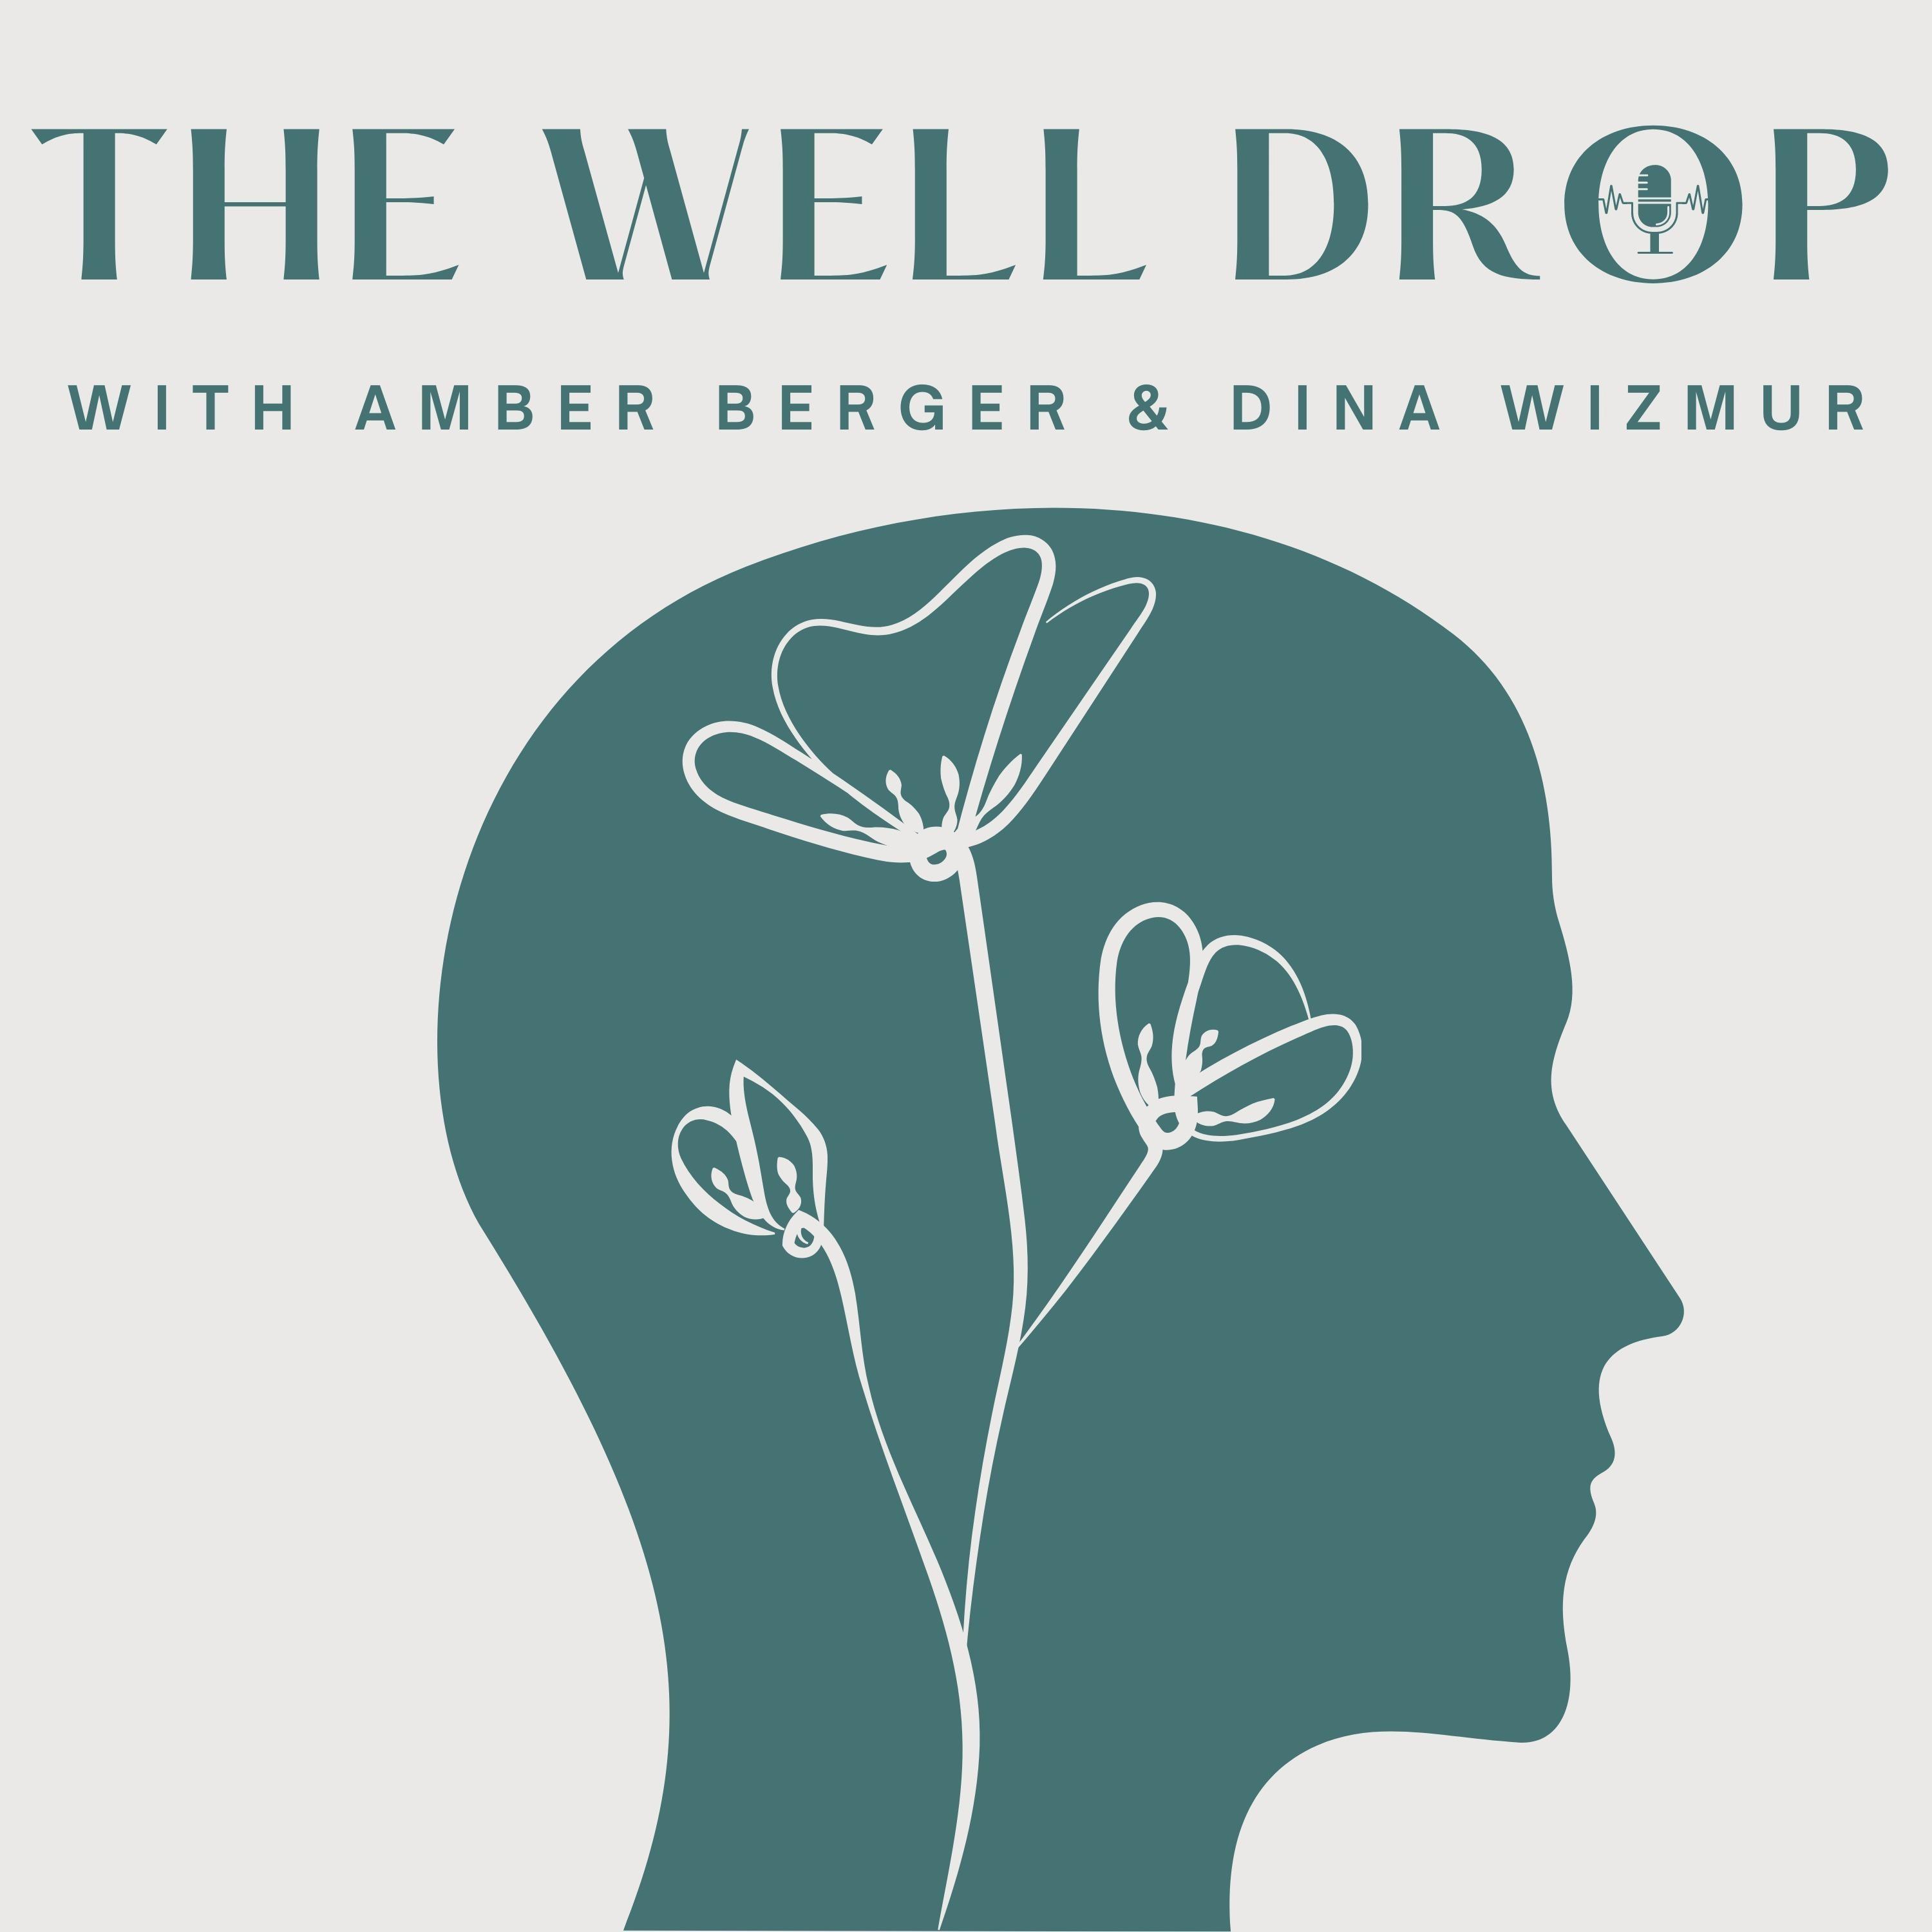 The Well Drop